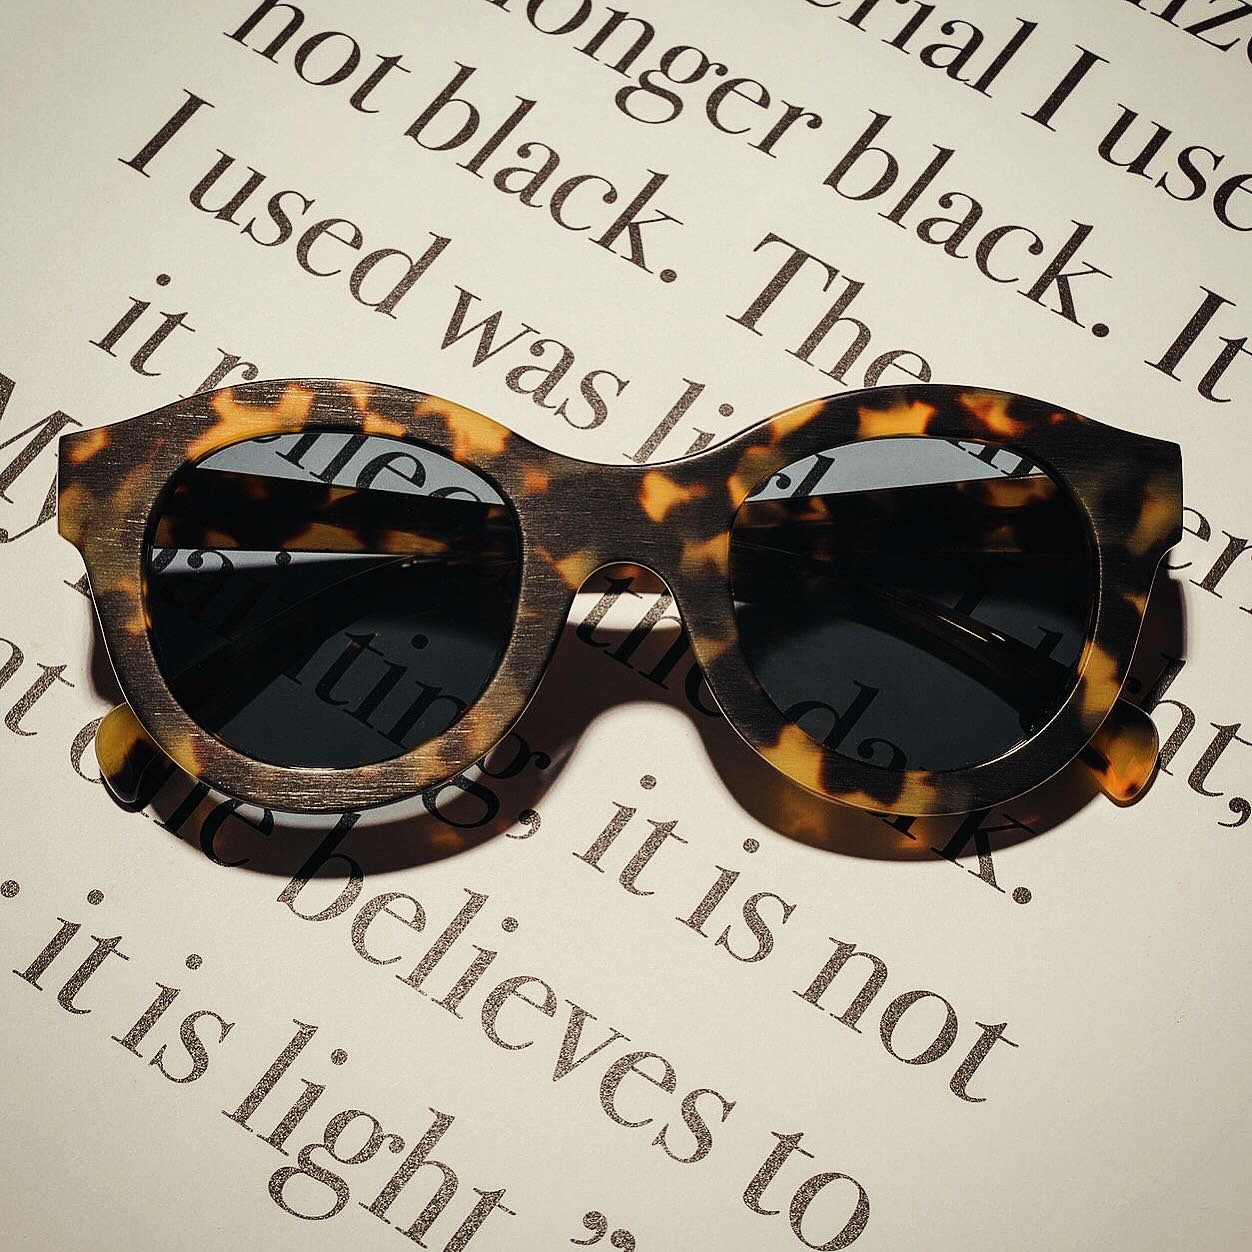 Make a statement with Jacques Durand eyewear! 🕶️✨❤️